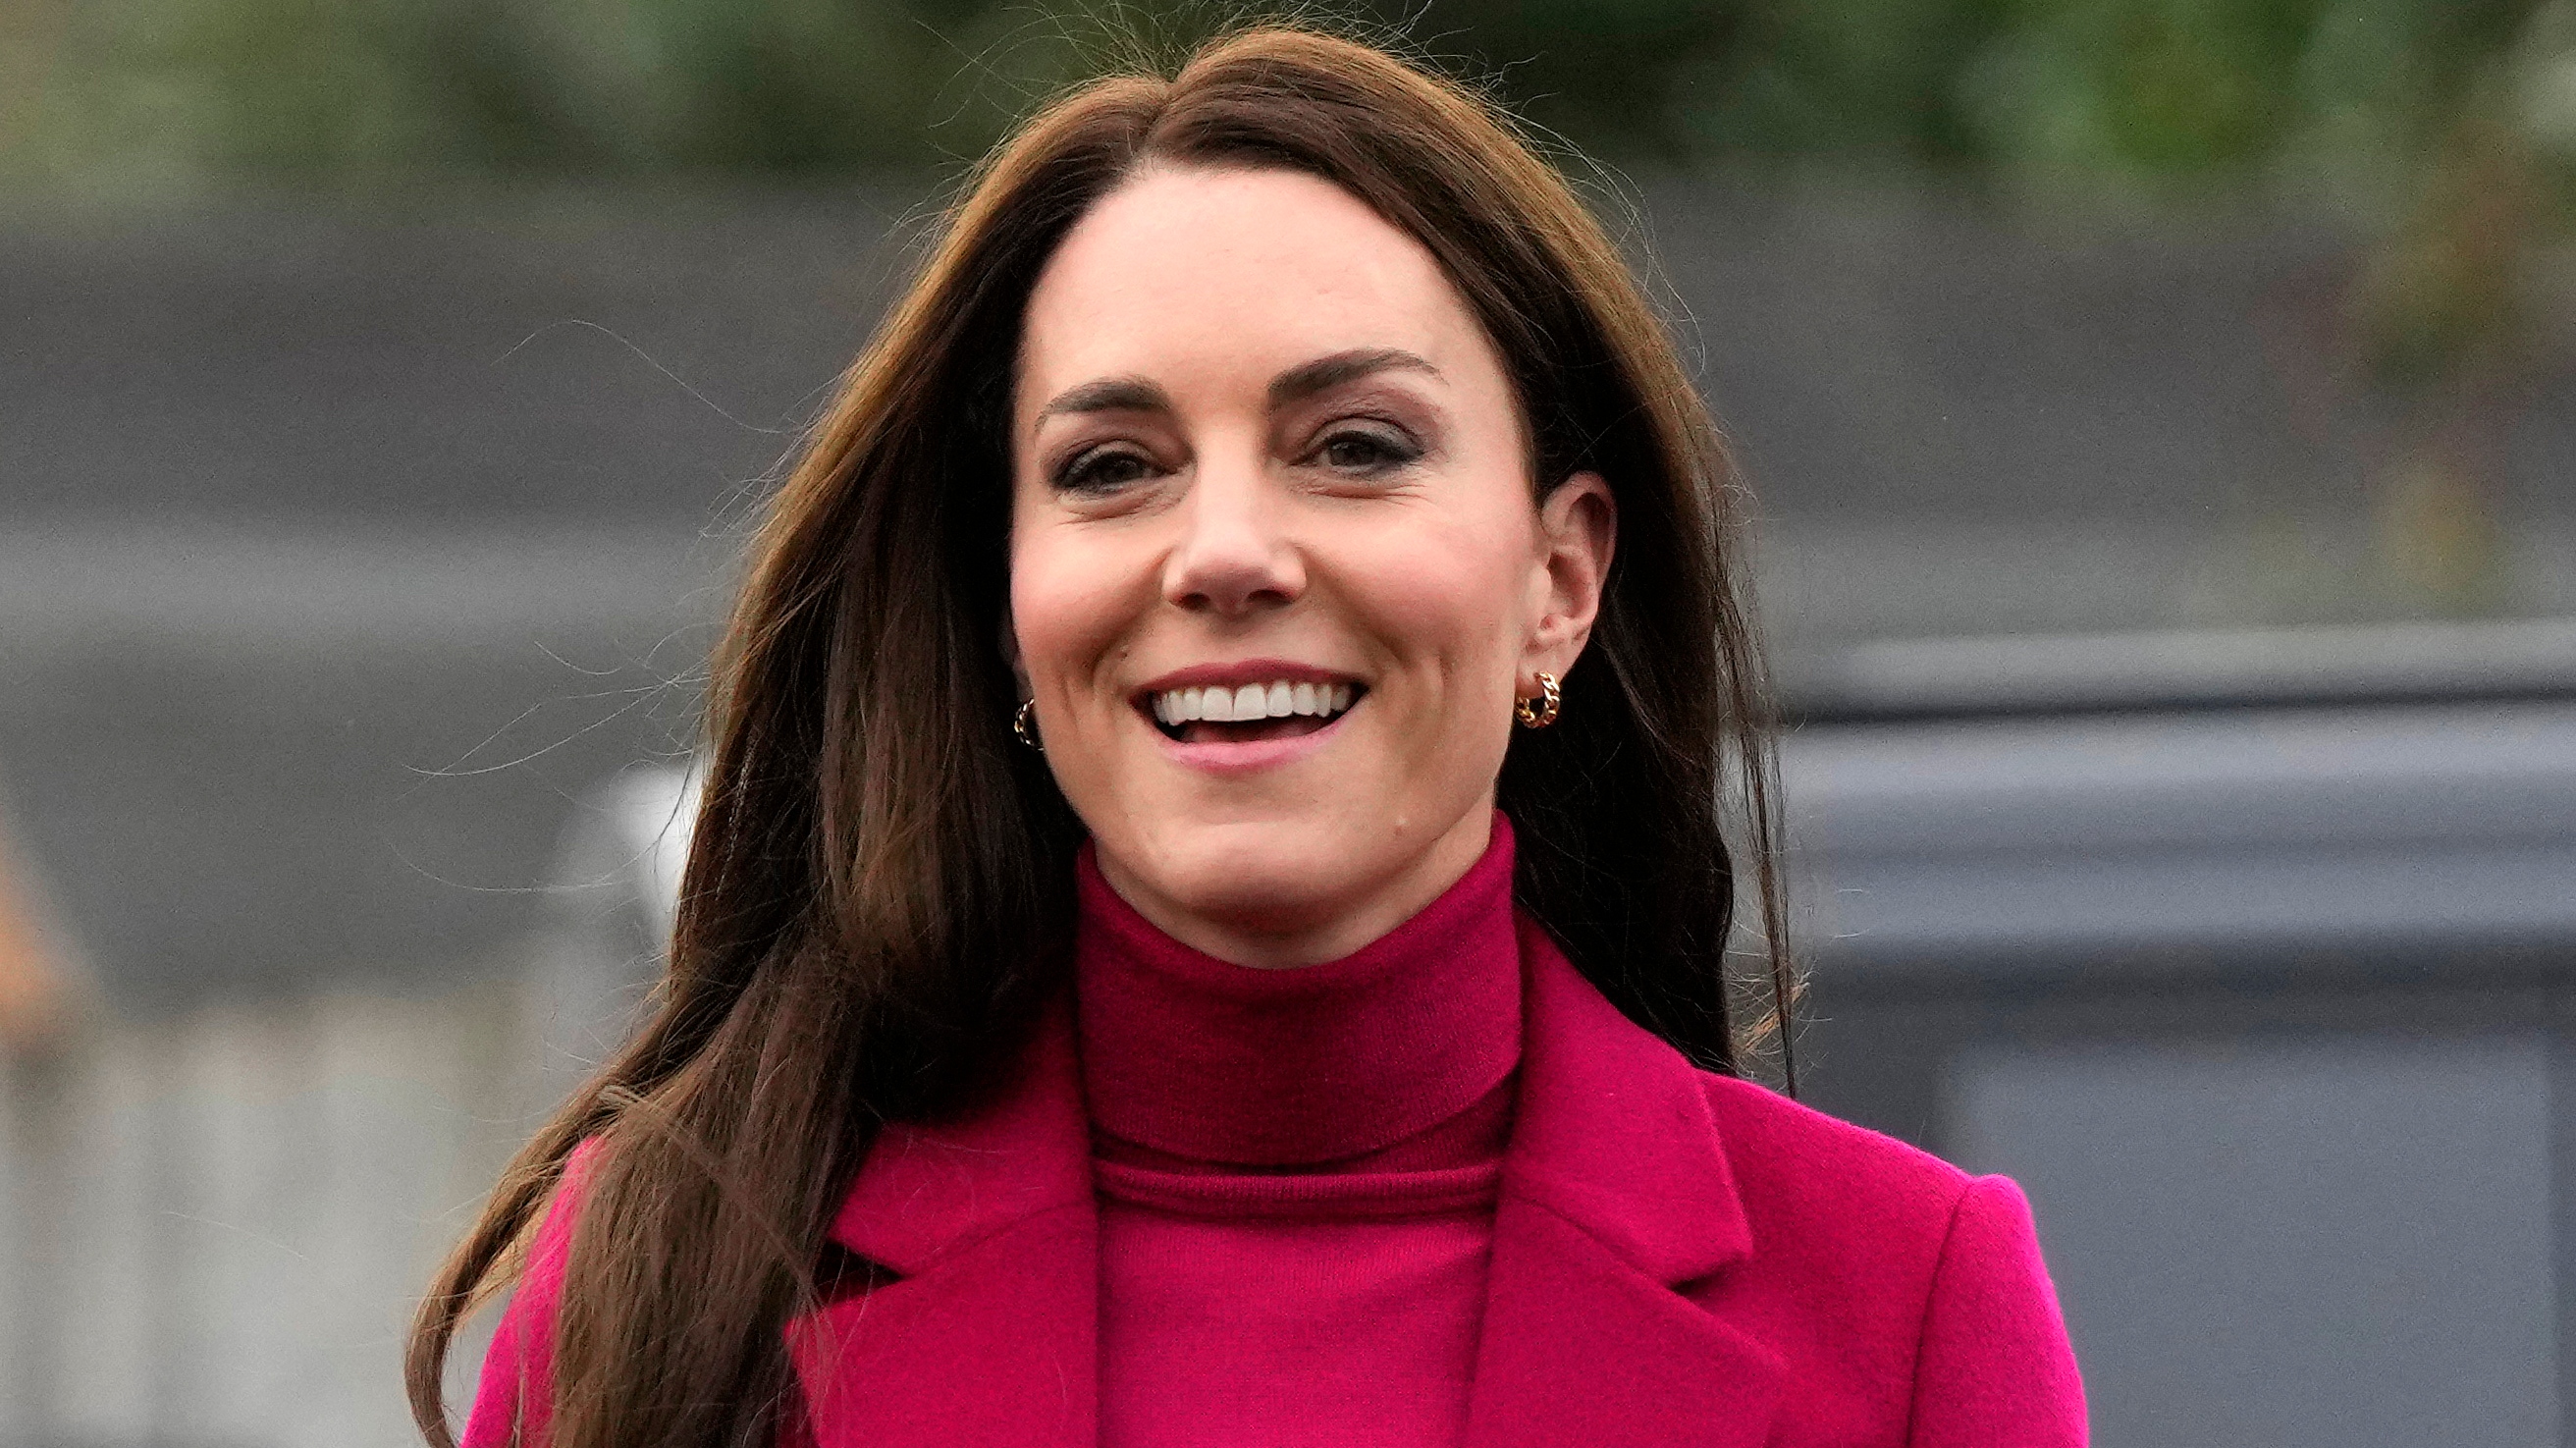 Kate Middleton's Hobbs coat on sale in these gorgeous shades | Woman & Home